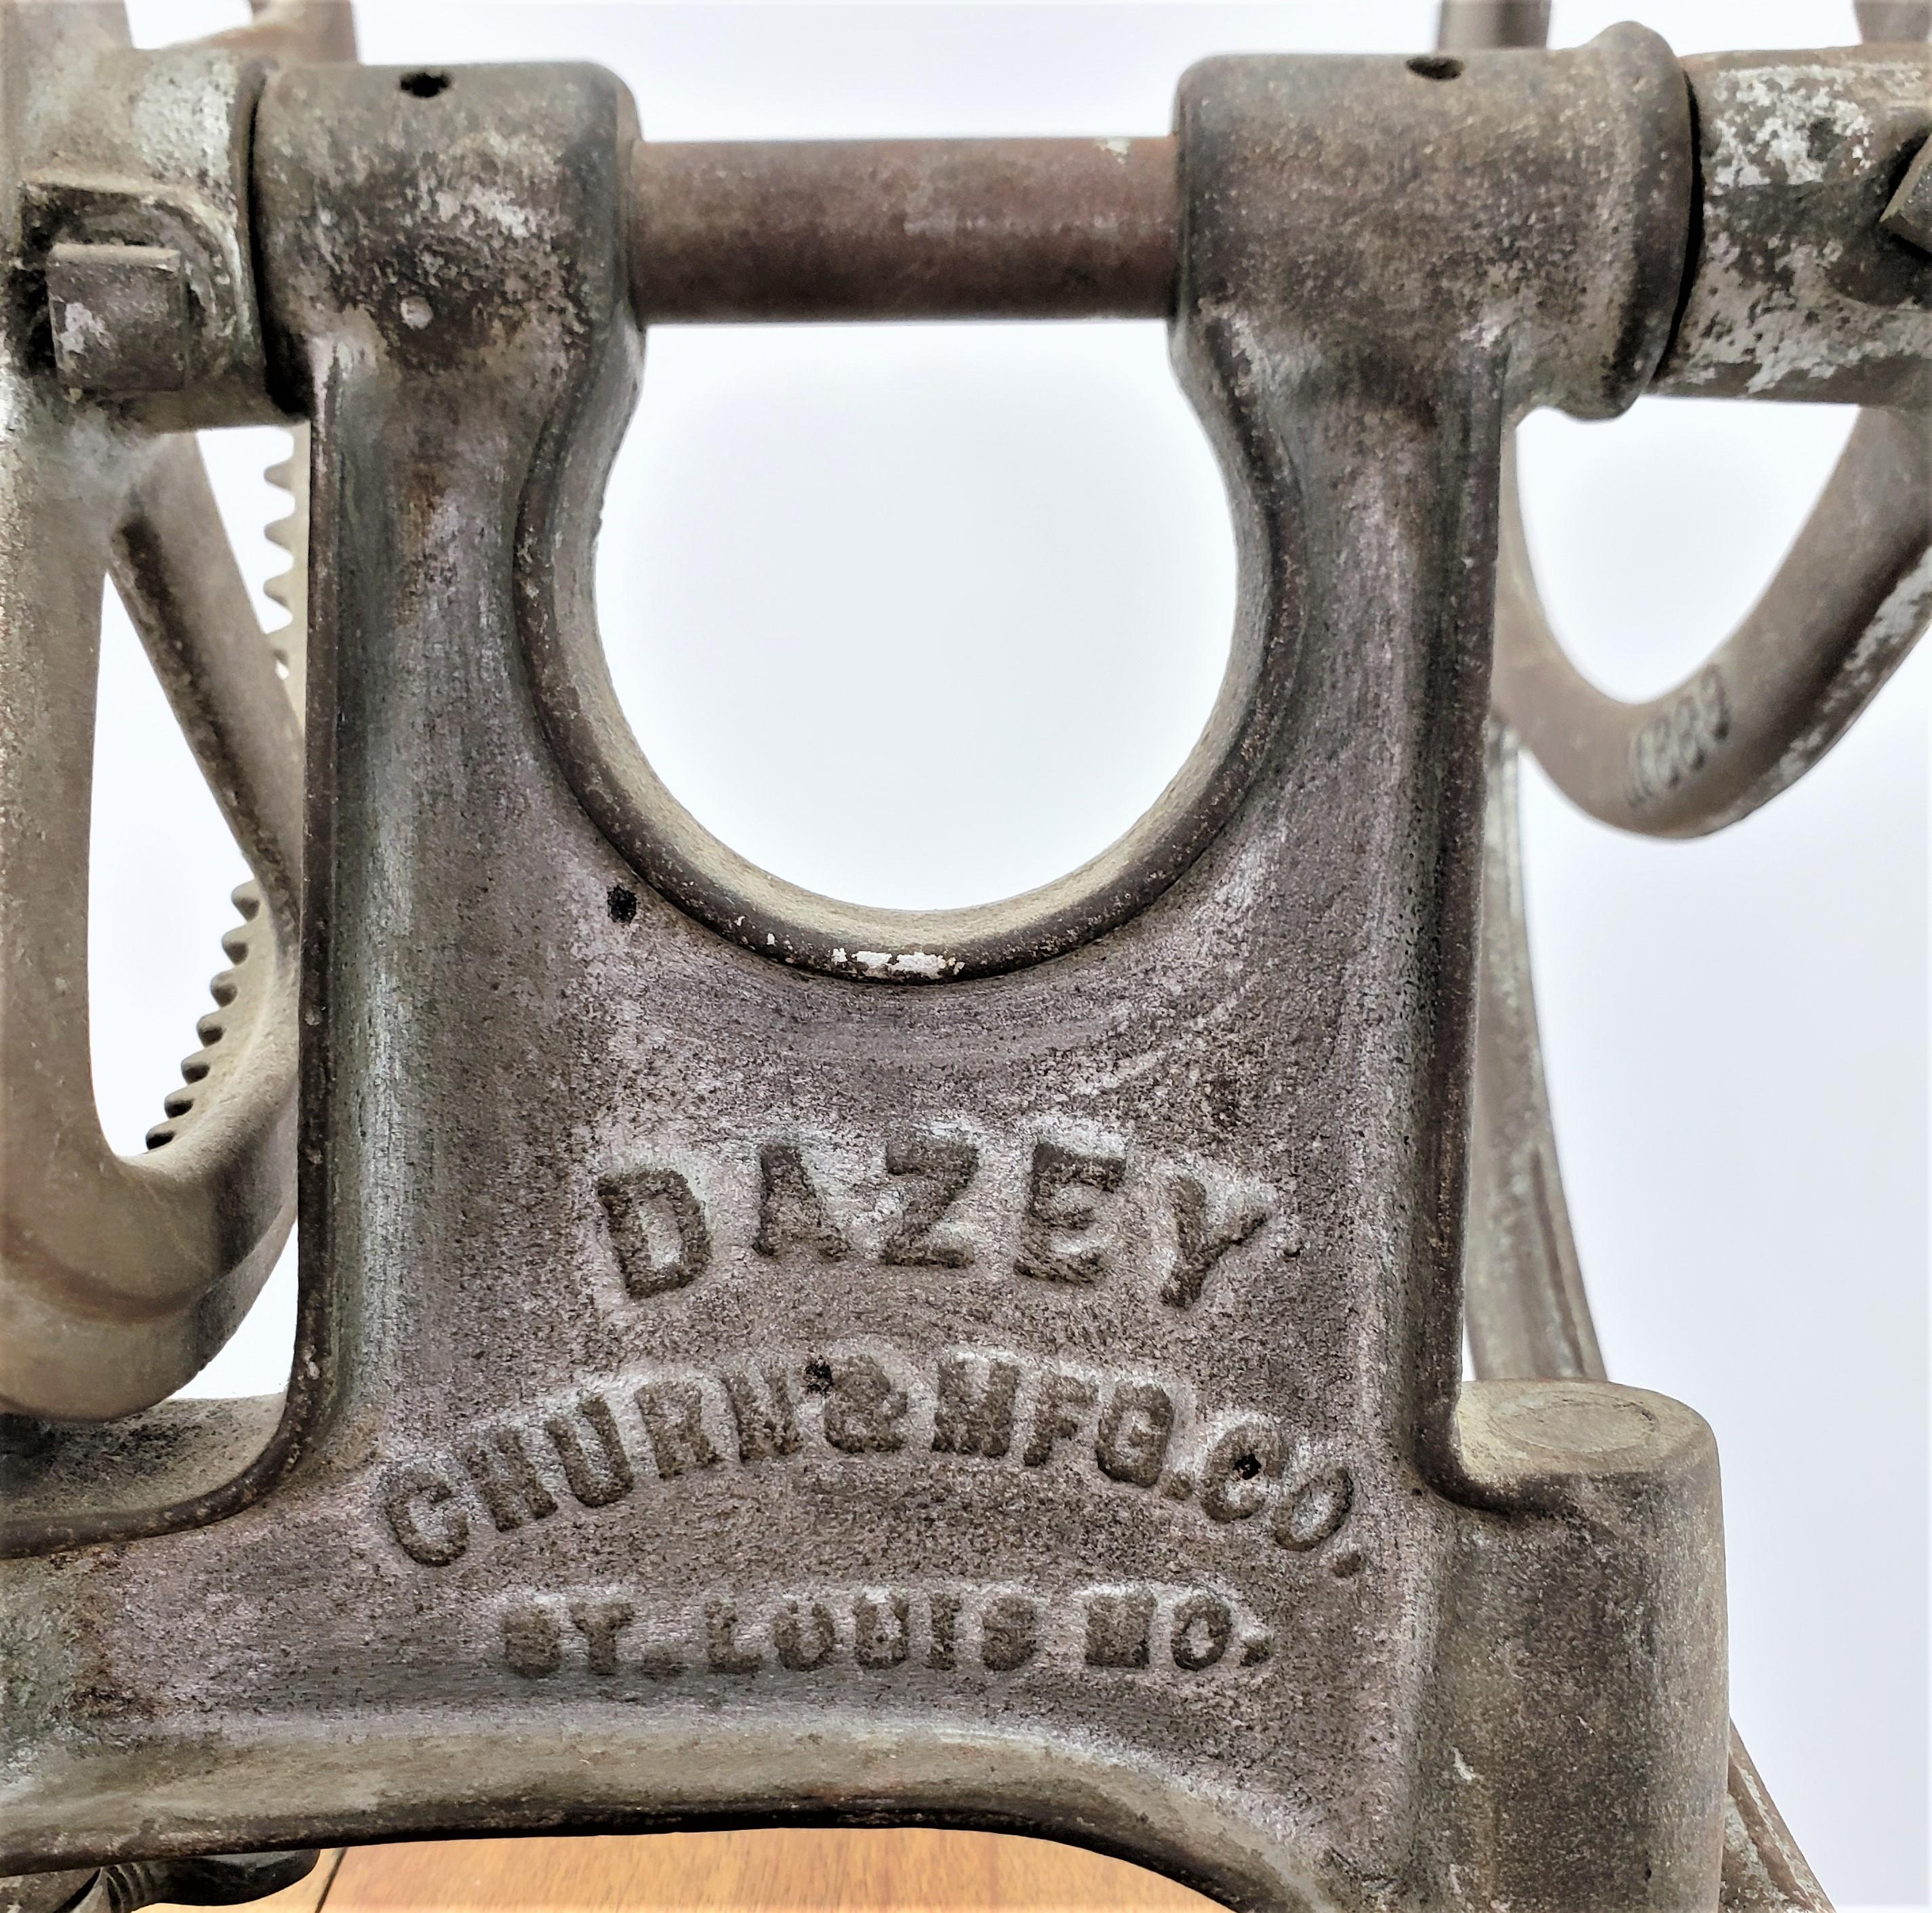 Antique Dazey Commercial Industrial Churn or Mixer with Toleware Decoration USA In Good Condition For Sale In Hamilton, Ontario